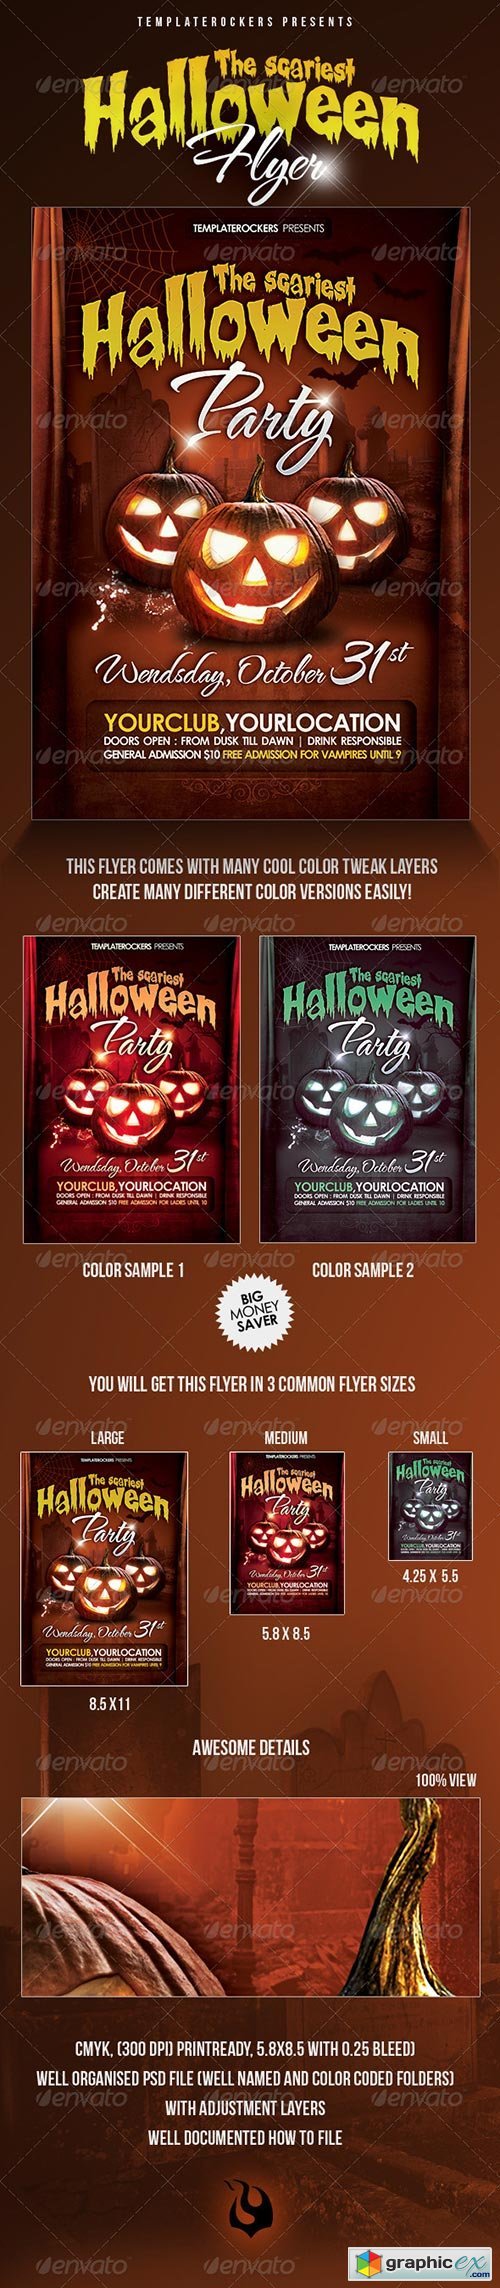 Scariest Halloween Party Flyer - 3 Sizes